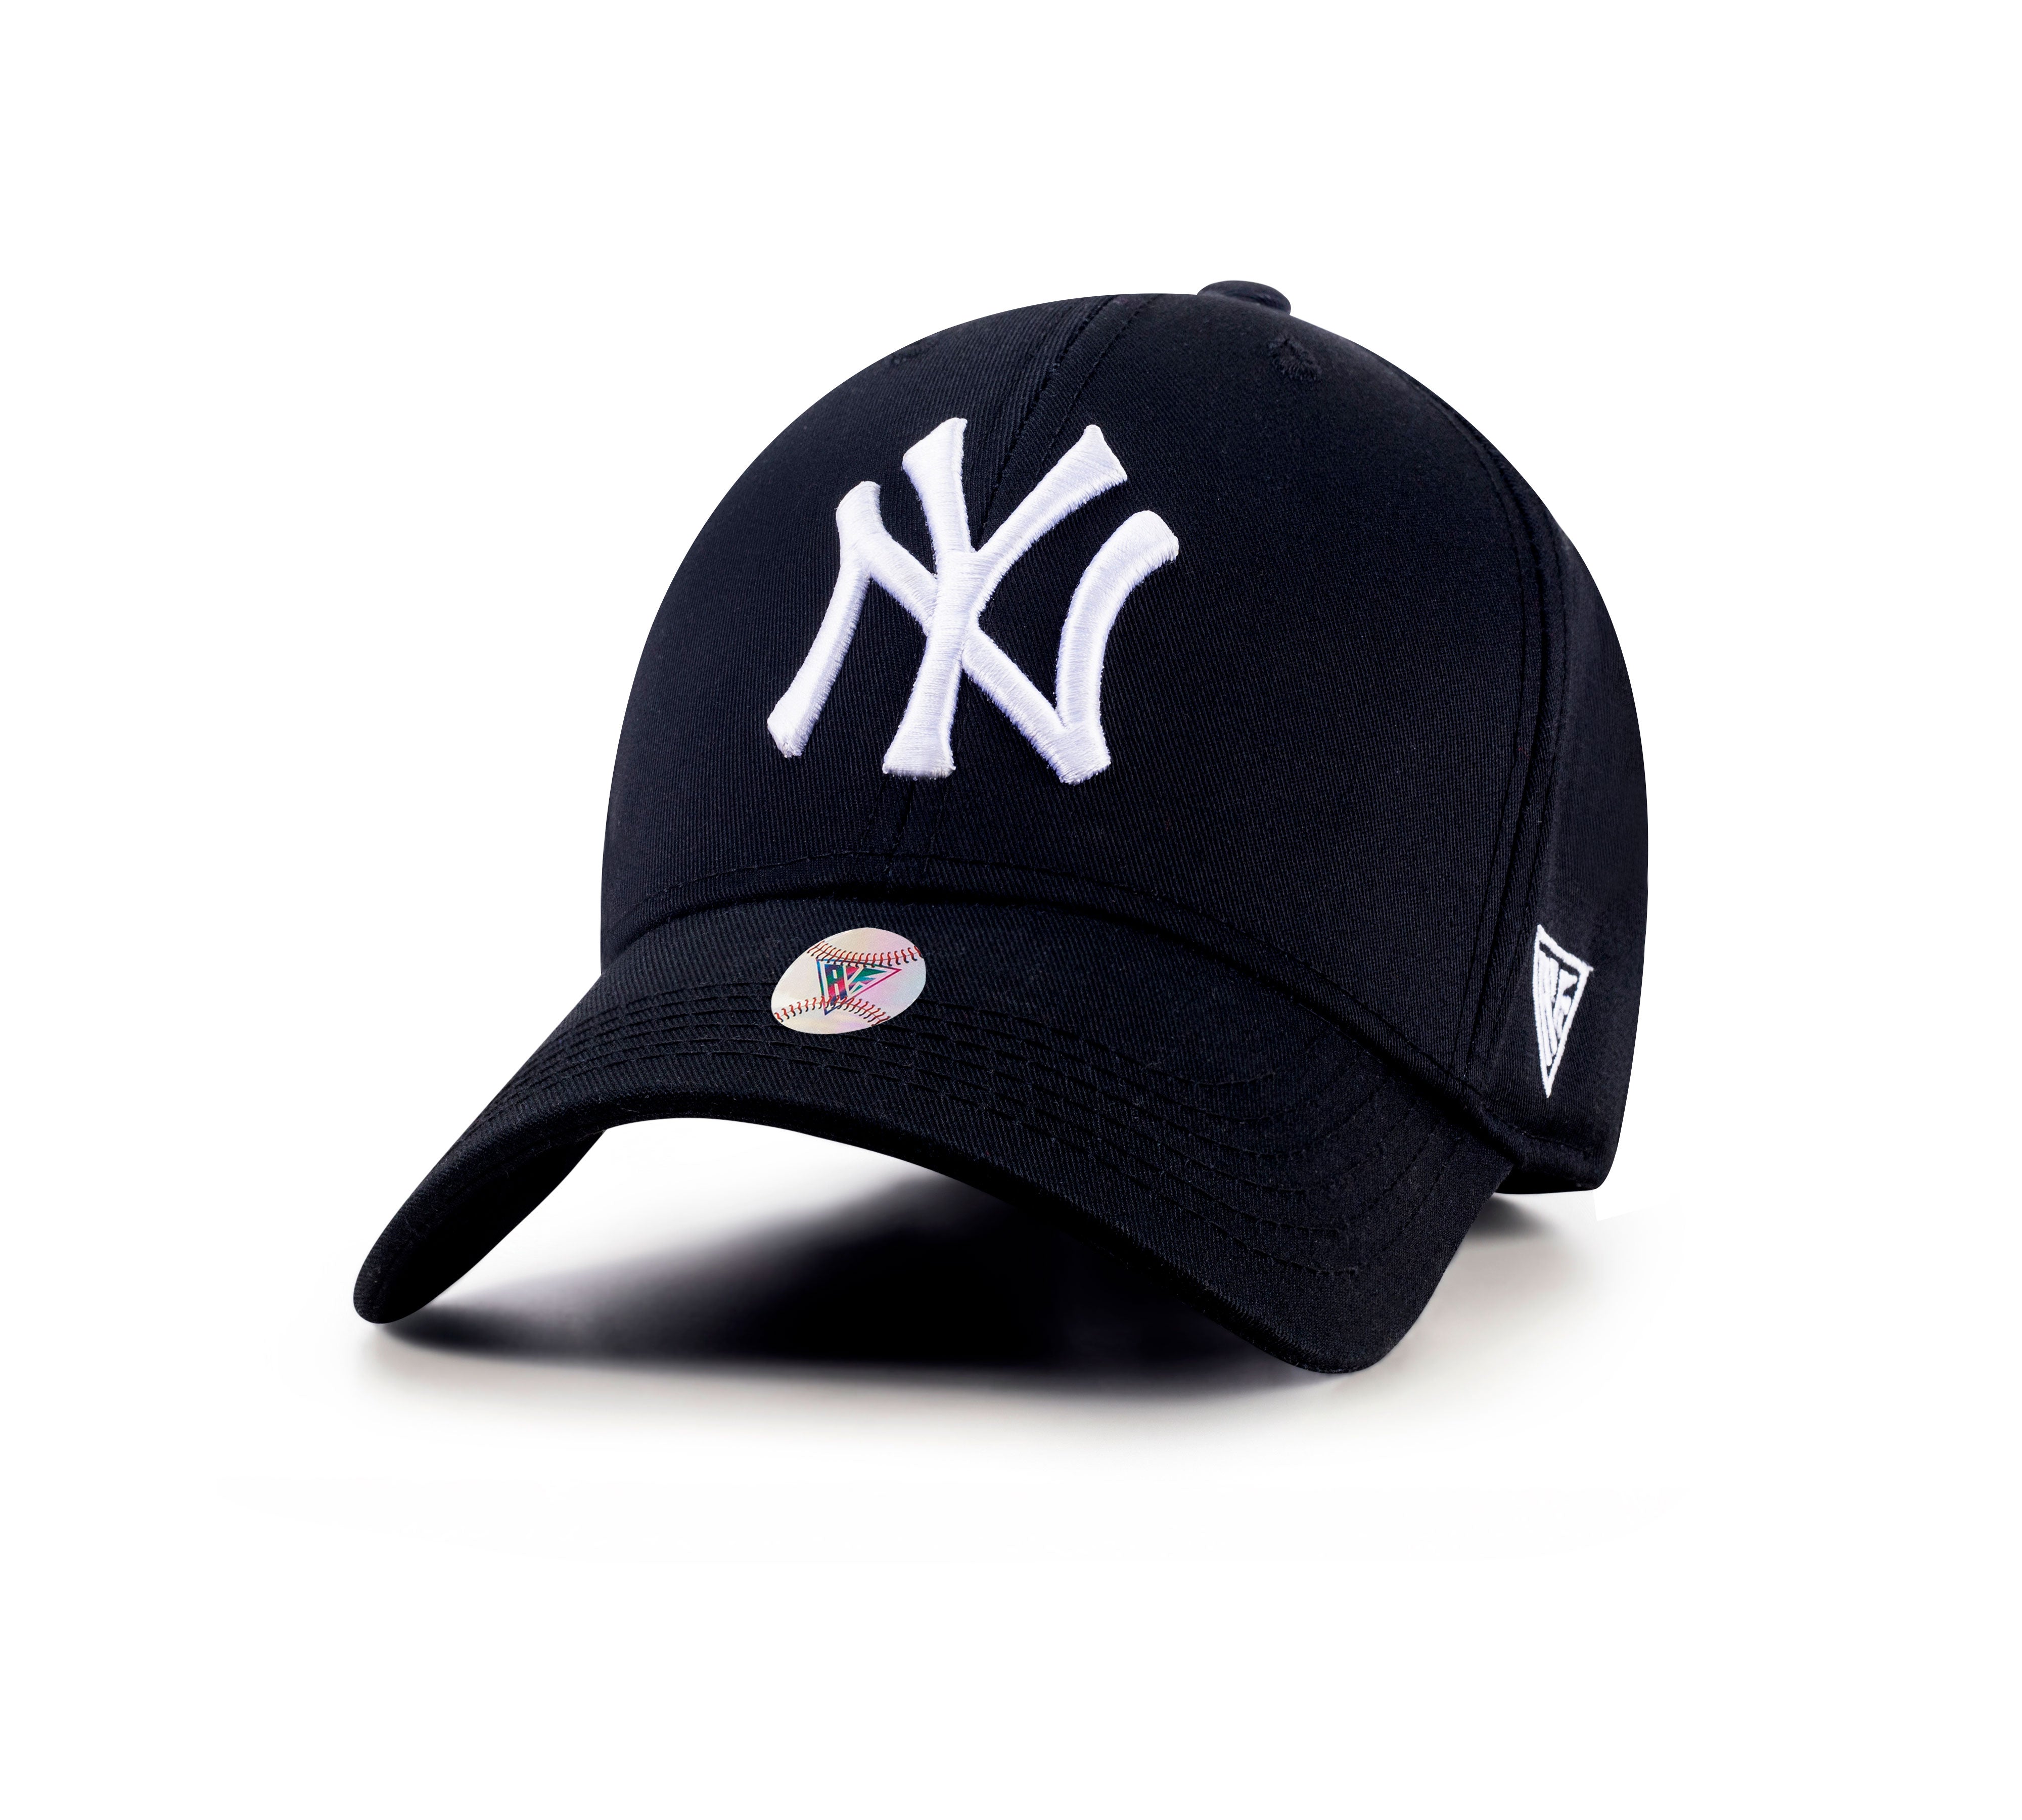 New York Cap for Men and Women | NY Hat Crafted from Pure Cotton Twill Material with Exquisite Embroidery I Adjustable NY Hat with Exceptional Comfort Durability & Versatility | Black